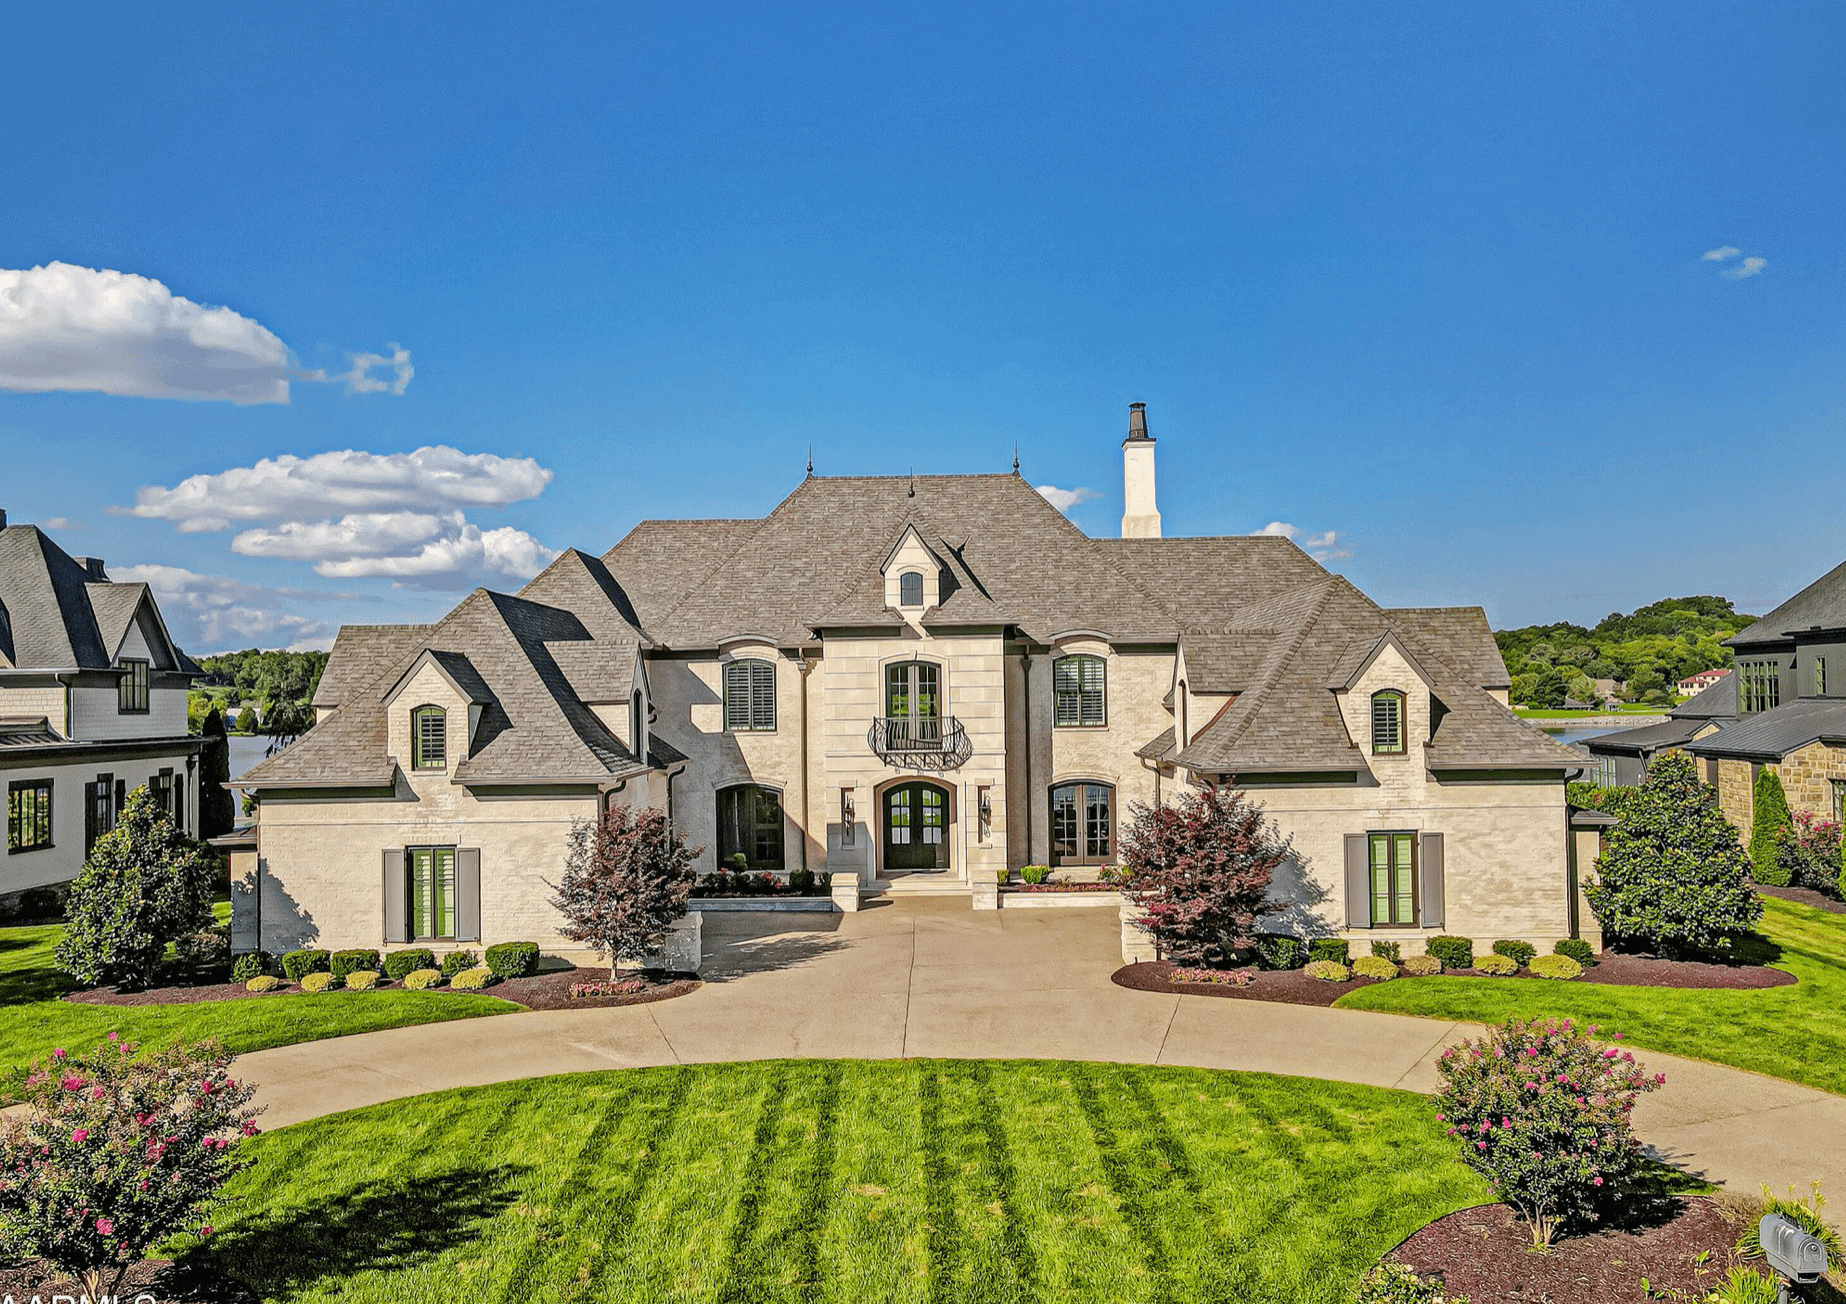 $4 Million Waterfront Home In Tennessee (PHOTOS)